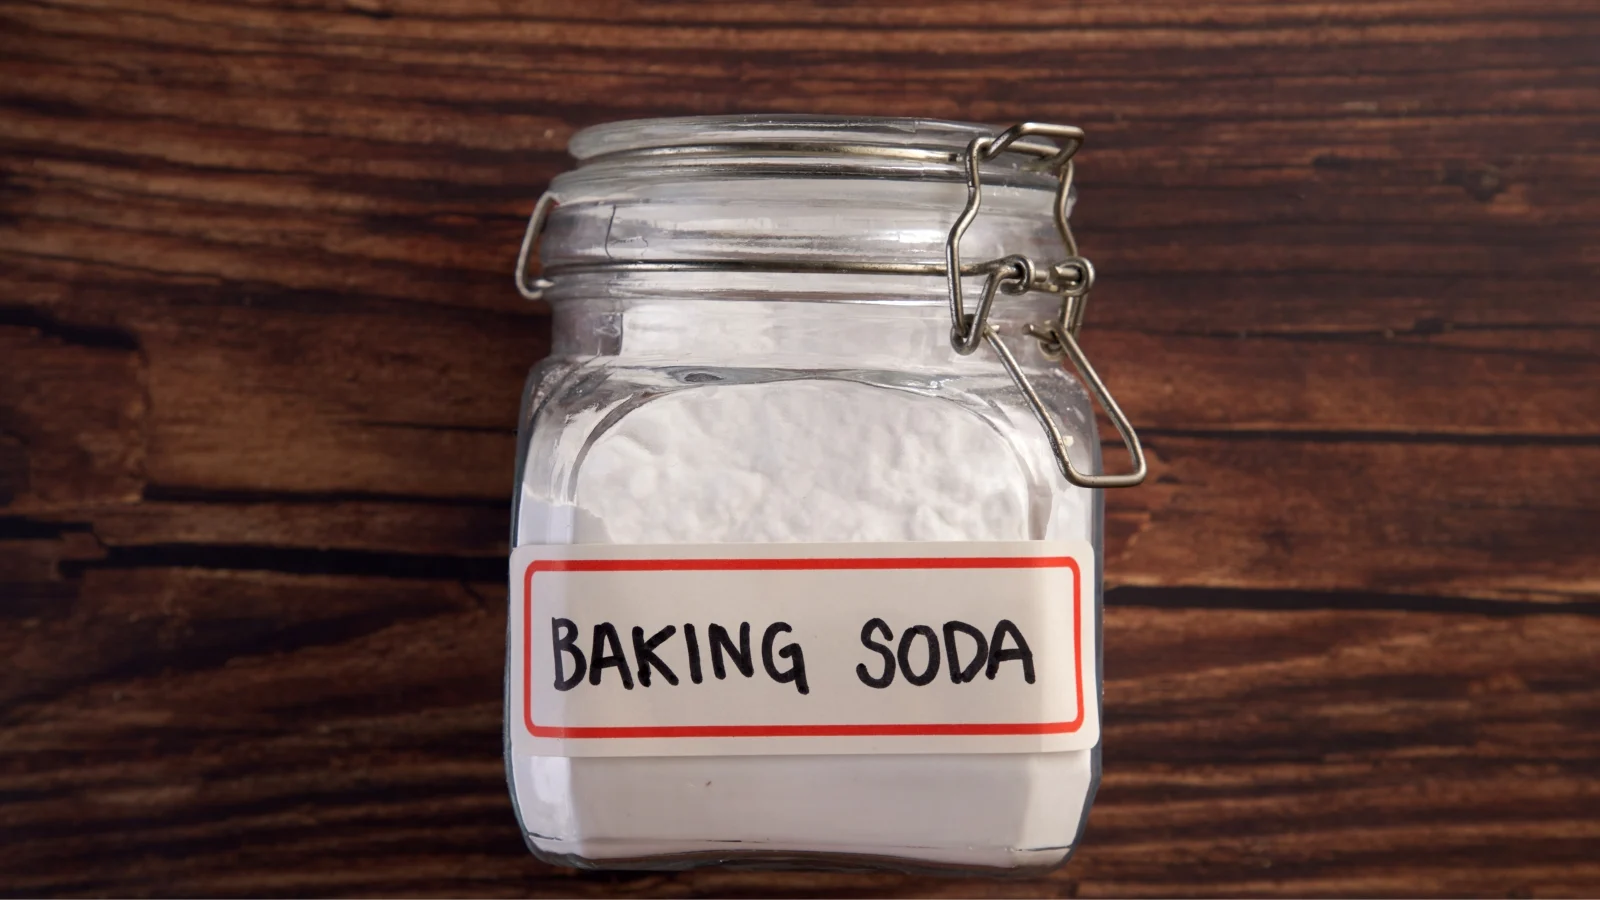 Baking soda in a glass jar on a wooden table.